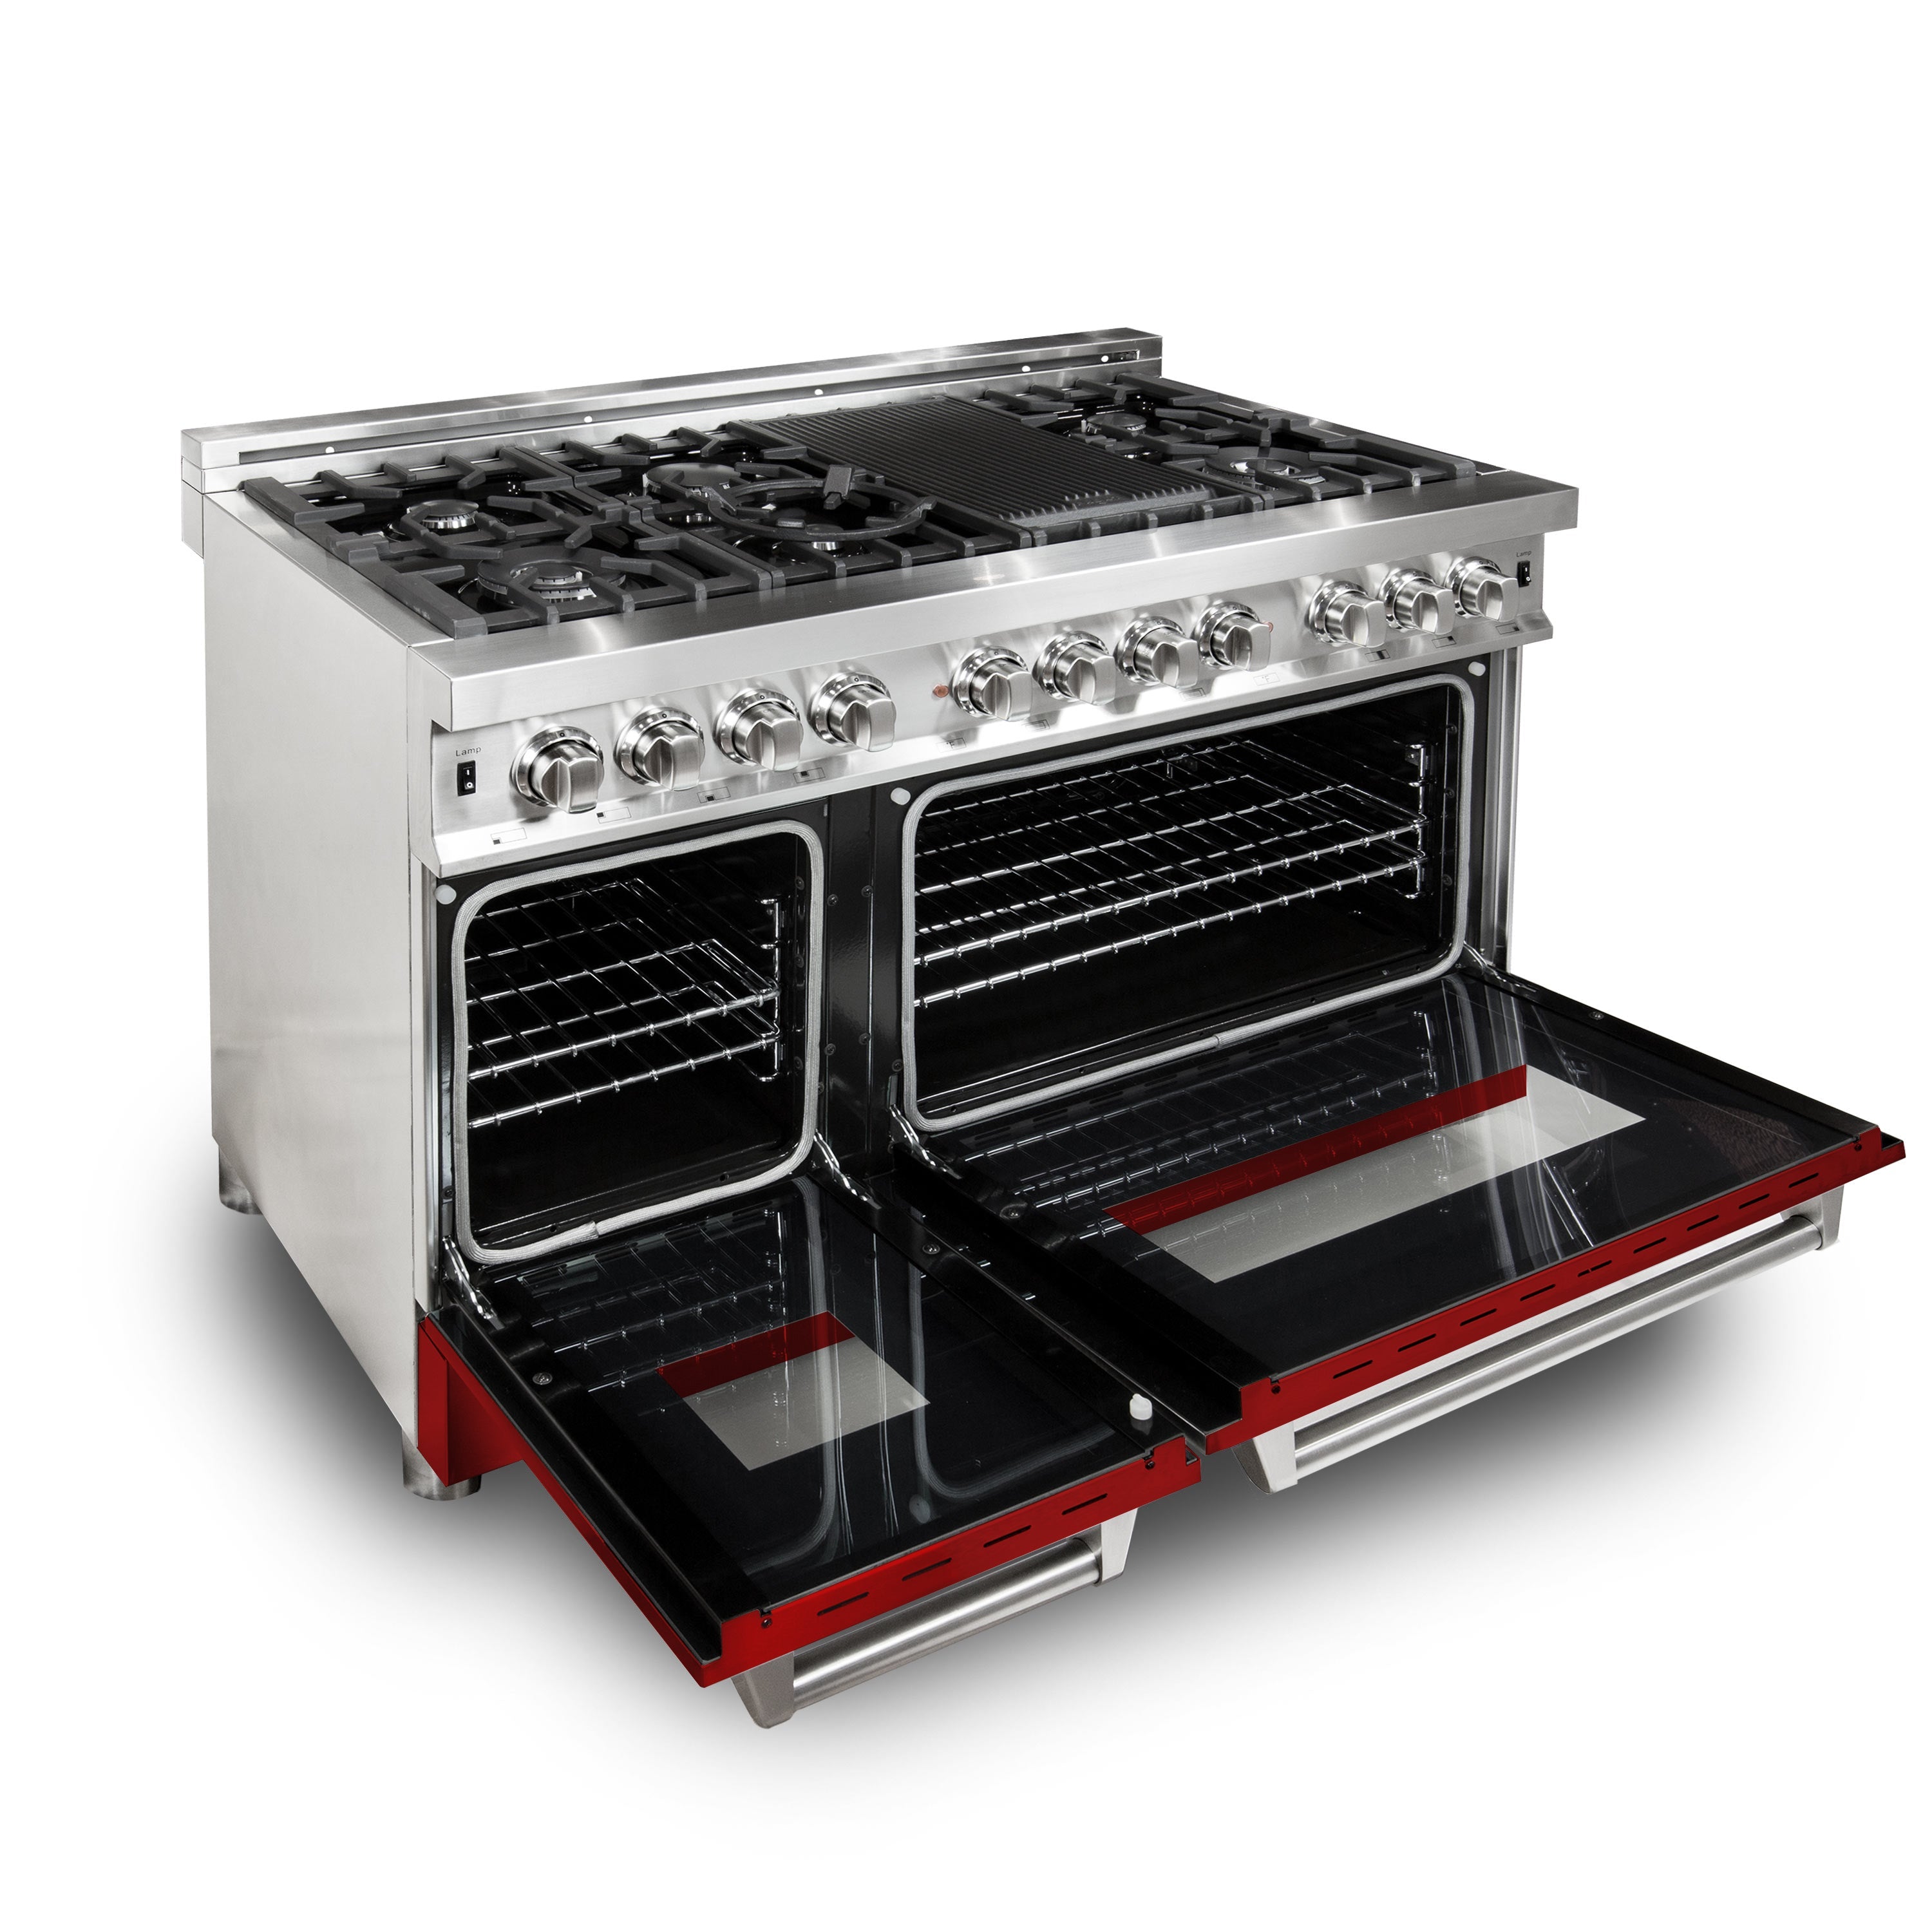 ZLINE 48 in. Professional Dual Fuel Range in Stainless Steel with Color Door Options (RA48) - New Star Living